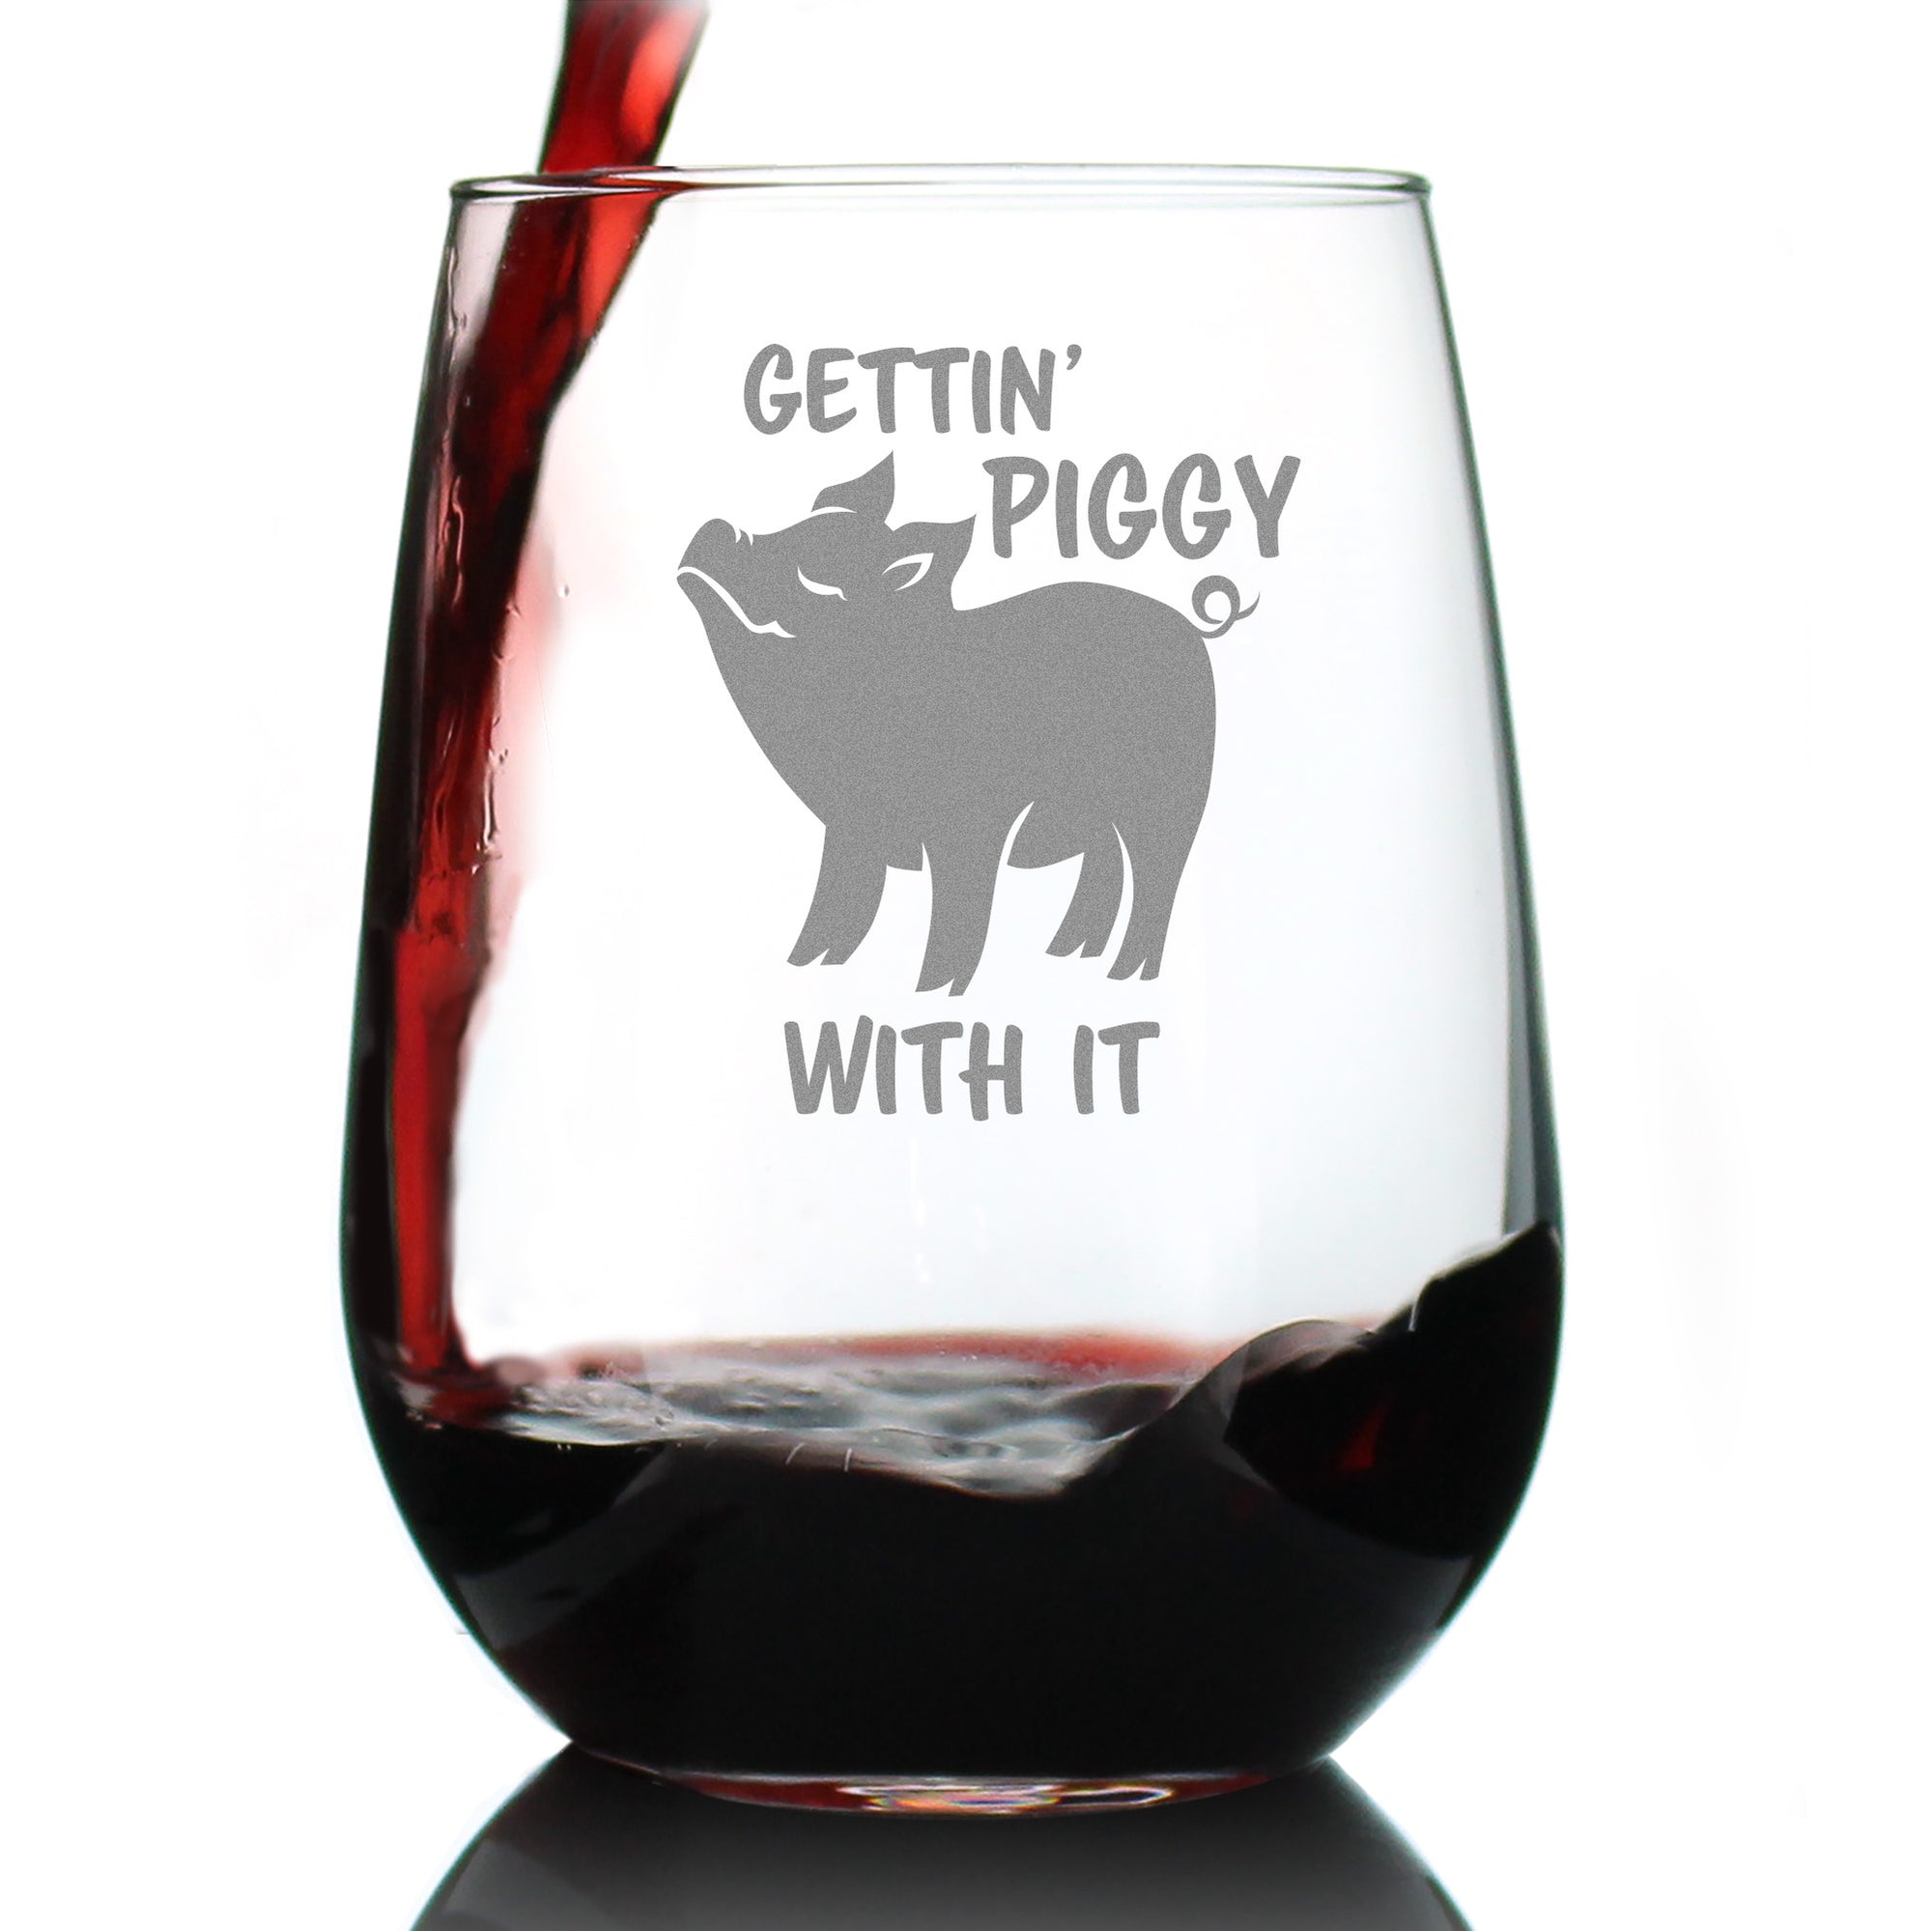 Gettin' Piggy With It - Cute Funny Stemless Wine Glass - Pig Decor Gifts for Lovers of Swine and Wine - Large 17 oz Glasses